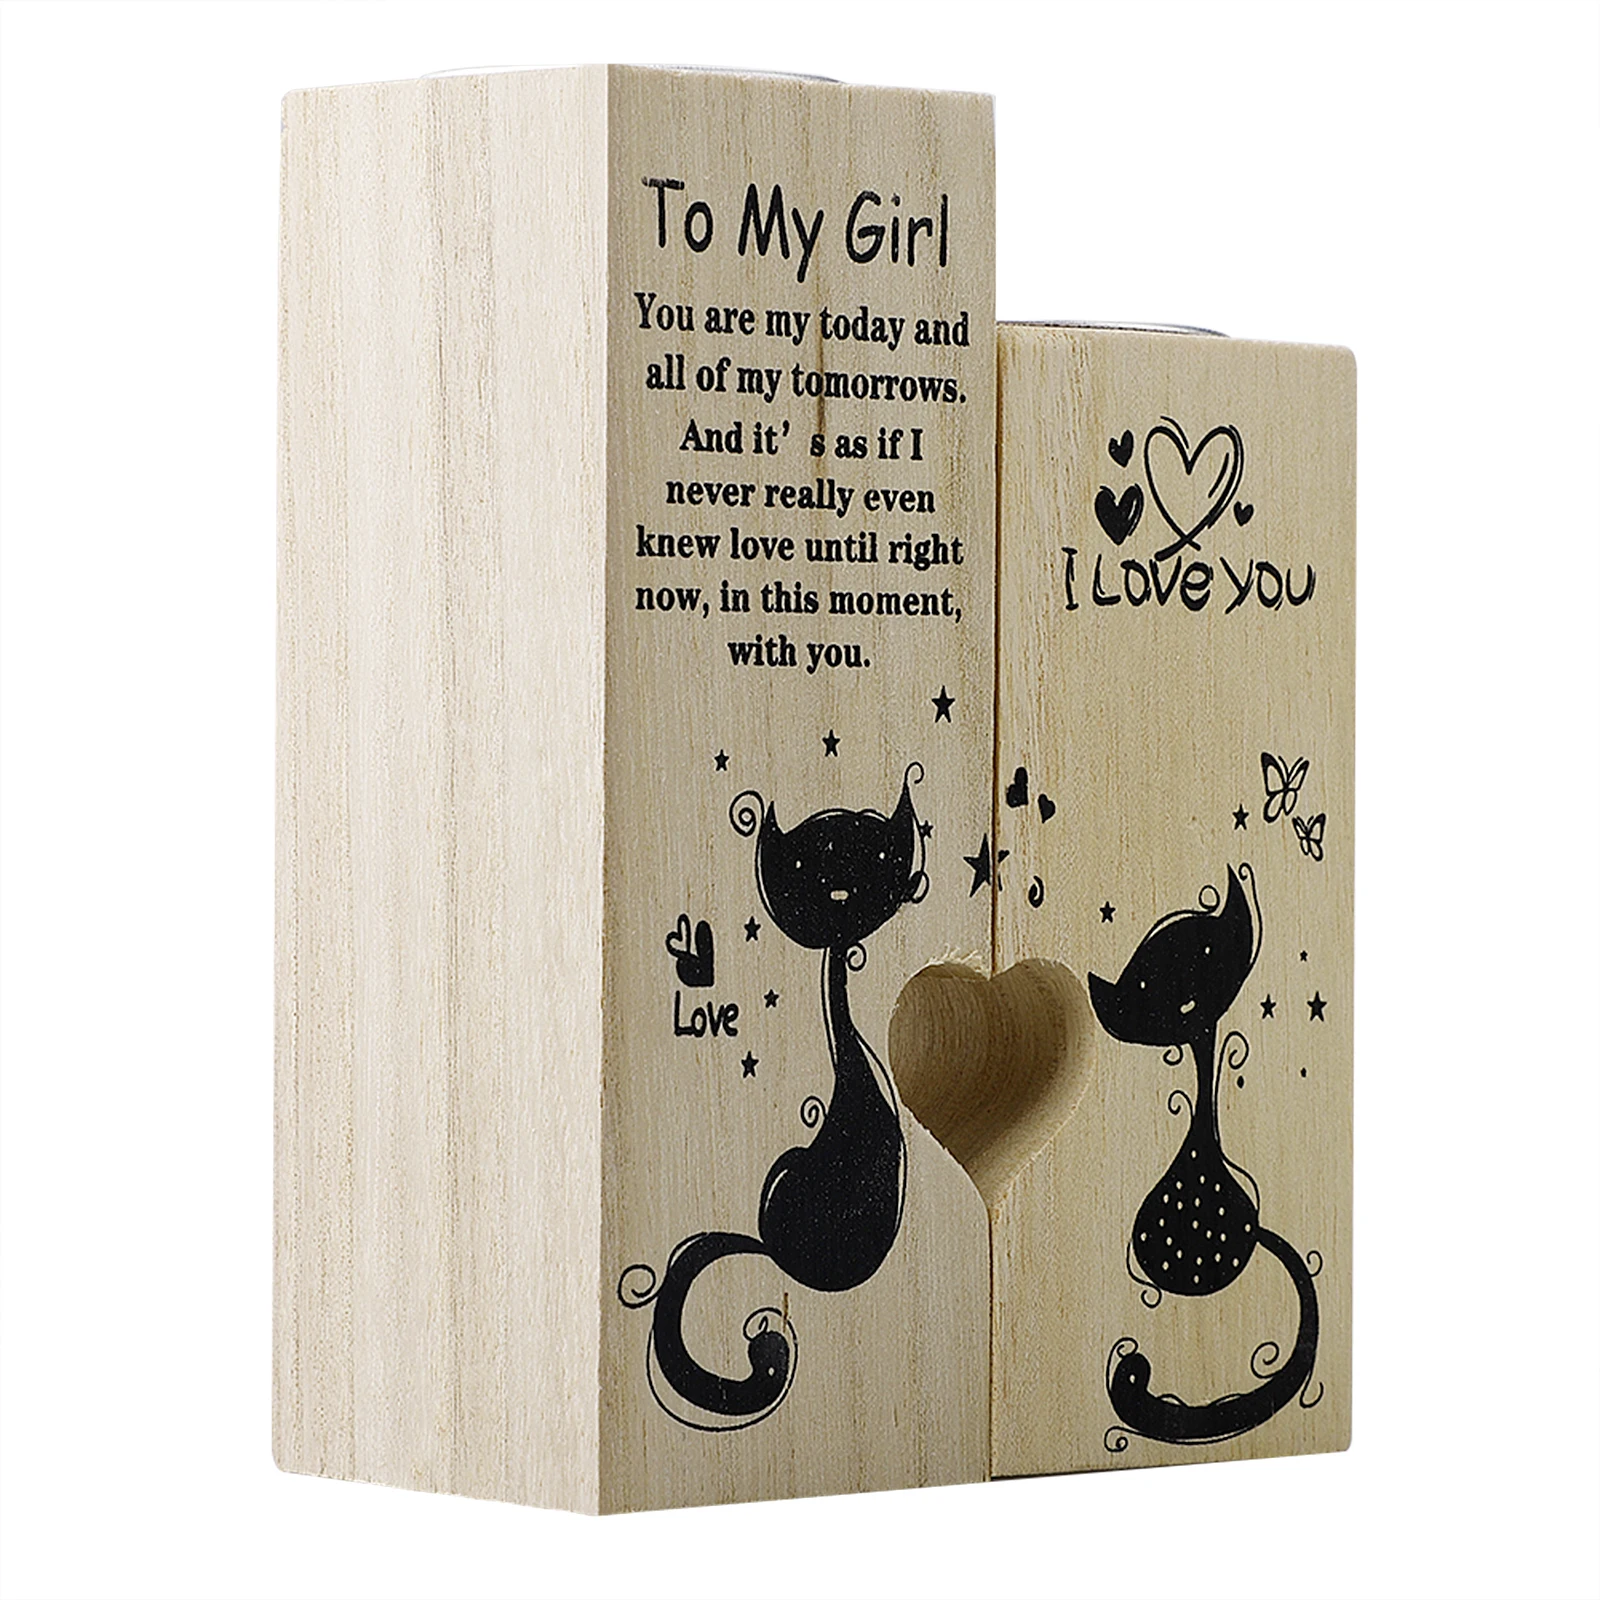 

To My Girl Heart-shaped Wooden Candle Holder Candlestick Shelf Valentine's Day Gift Husband to Wife for Birthday Anniversary